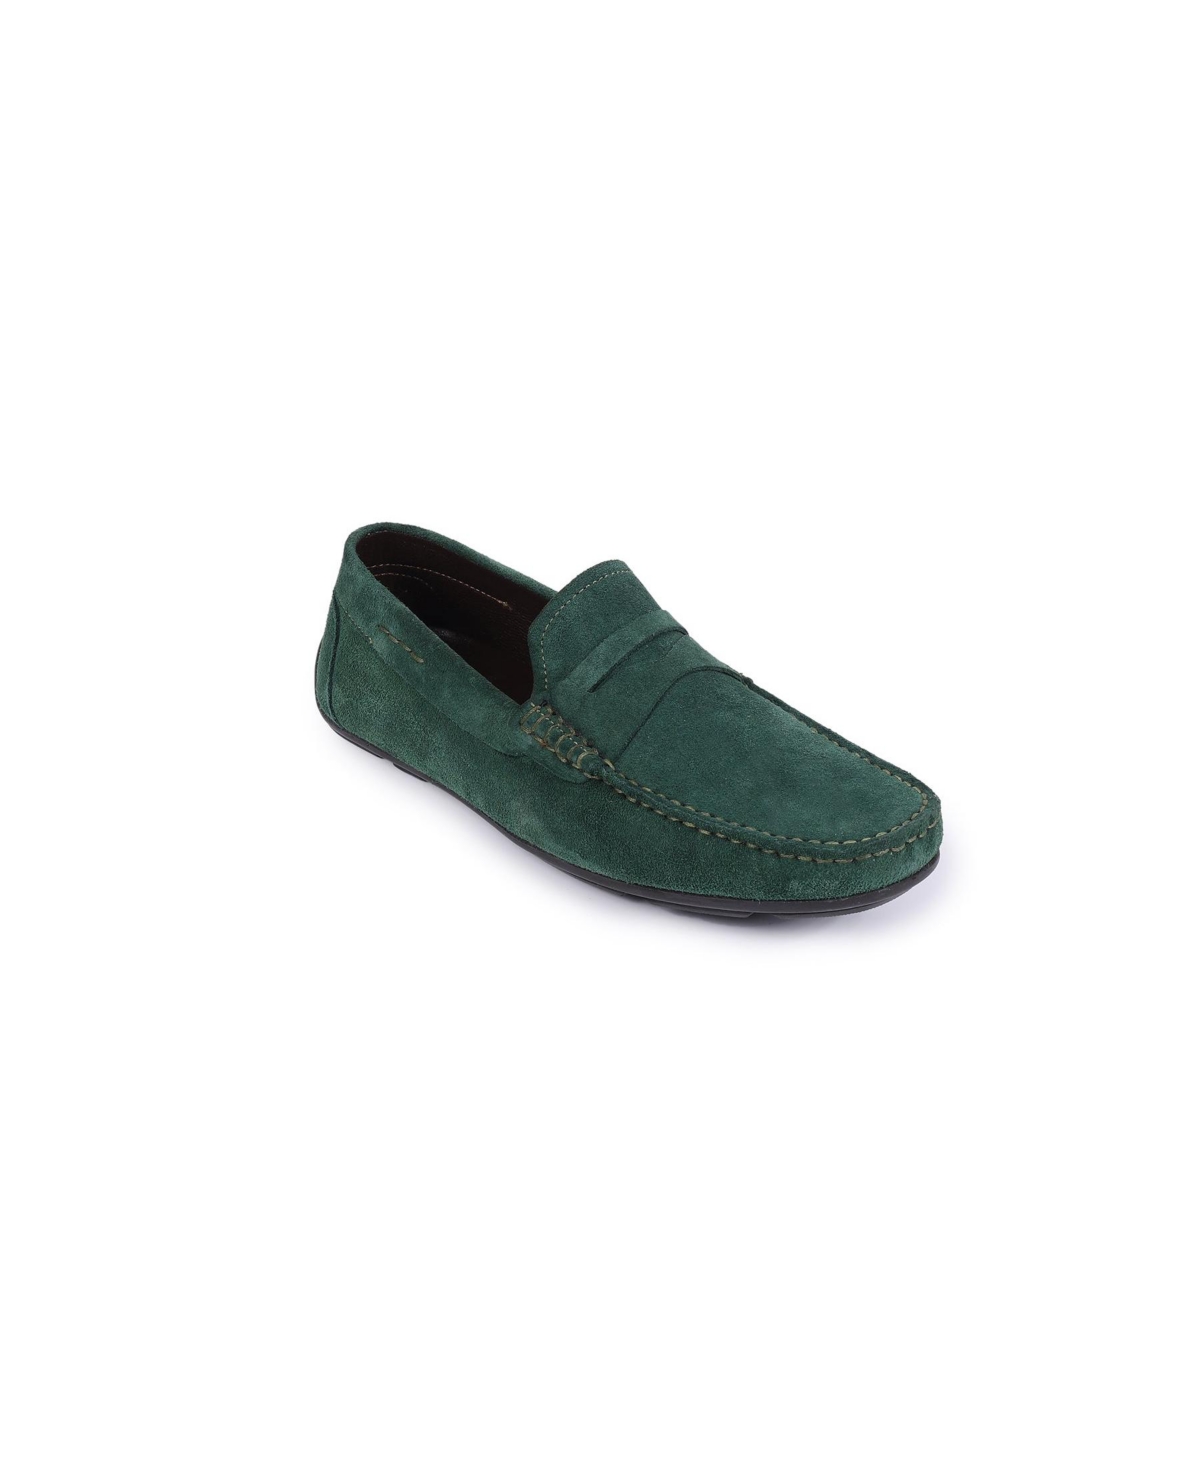 VELLAPAIS MEN'S JASMINE SUEDE ALL DAY COMFORT DRIVERS